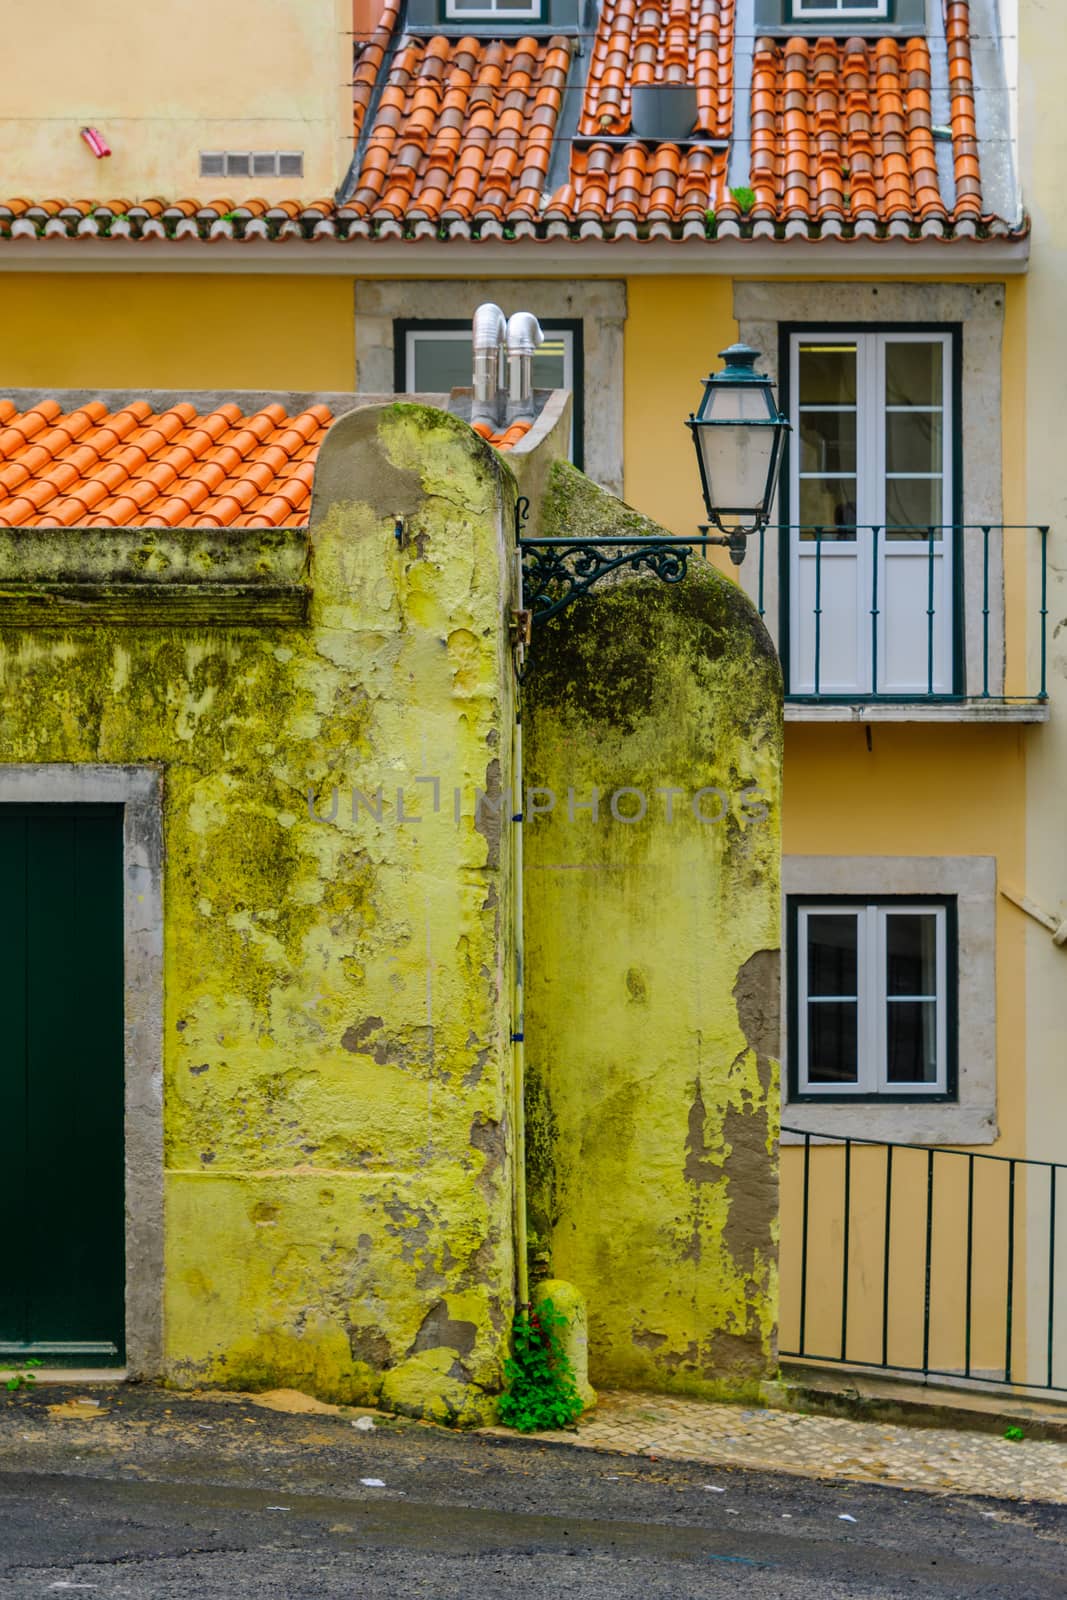 Typical building in the Alfama district, Lisbon, Portugal